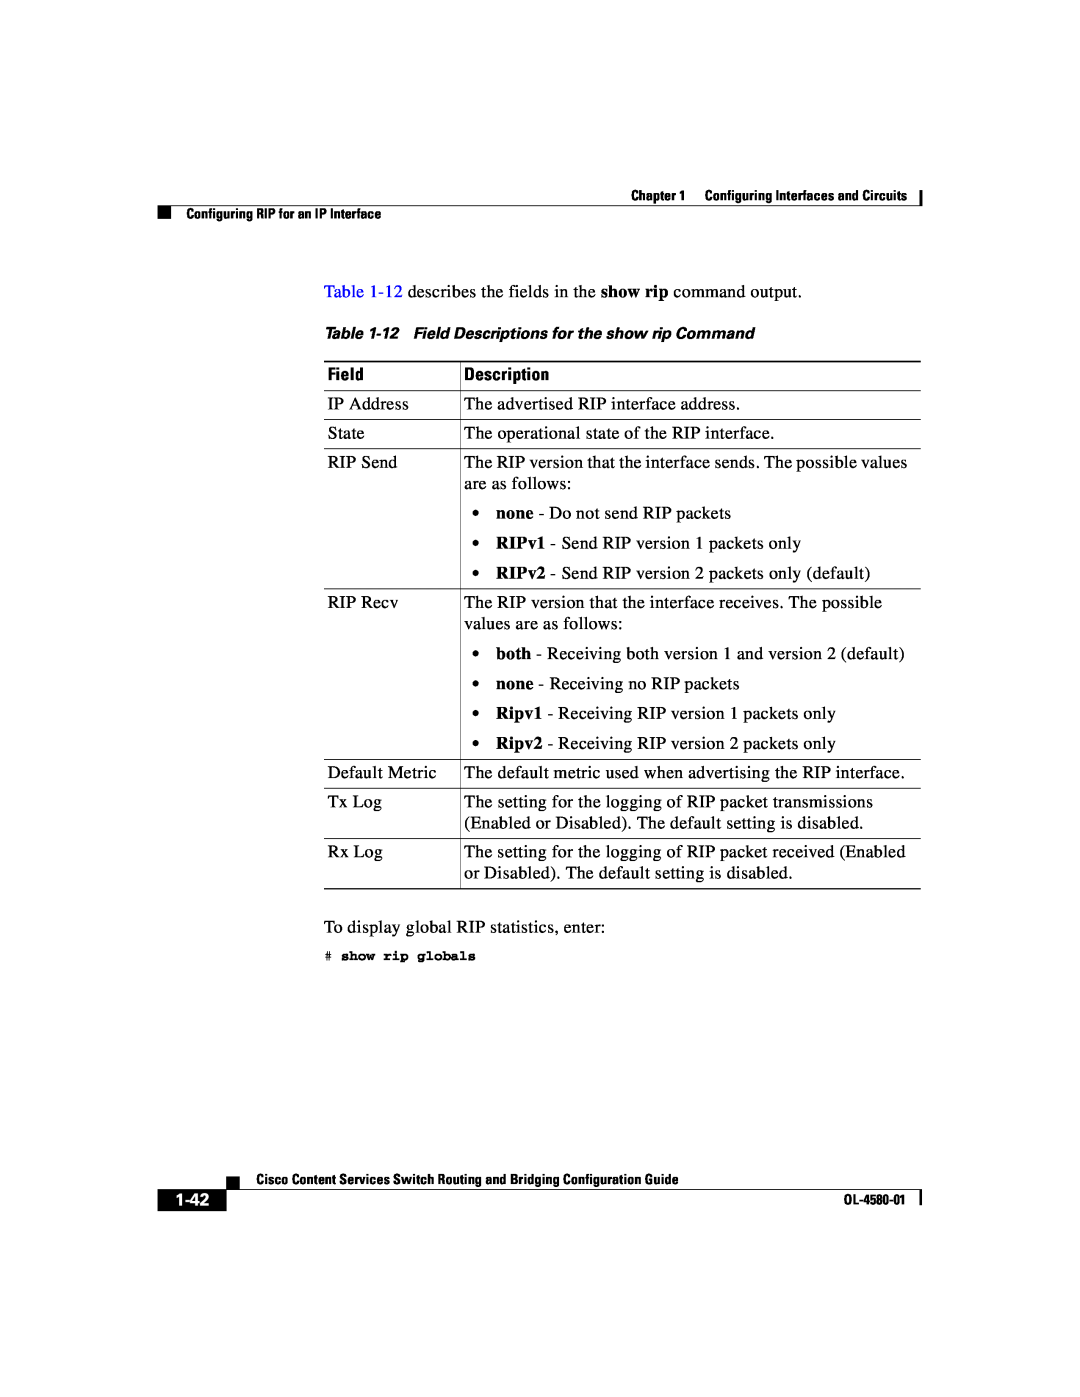 Cisco Systems OL-4580-01 manual 1-42, 12 Field Descriptions for the show rip Command, # show rip globals 